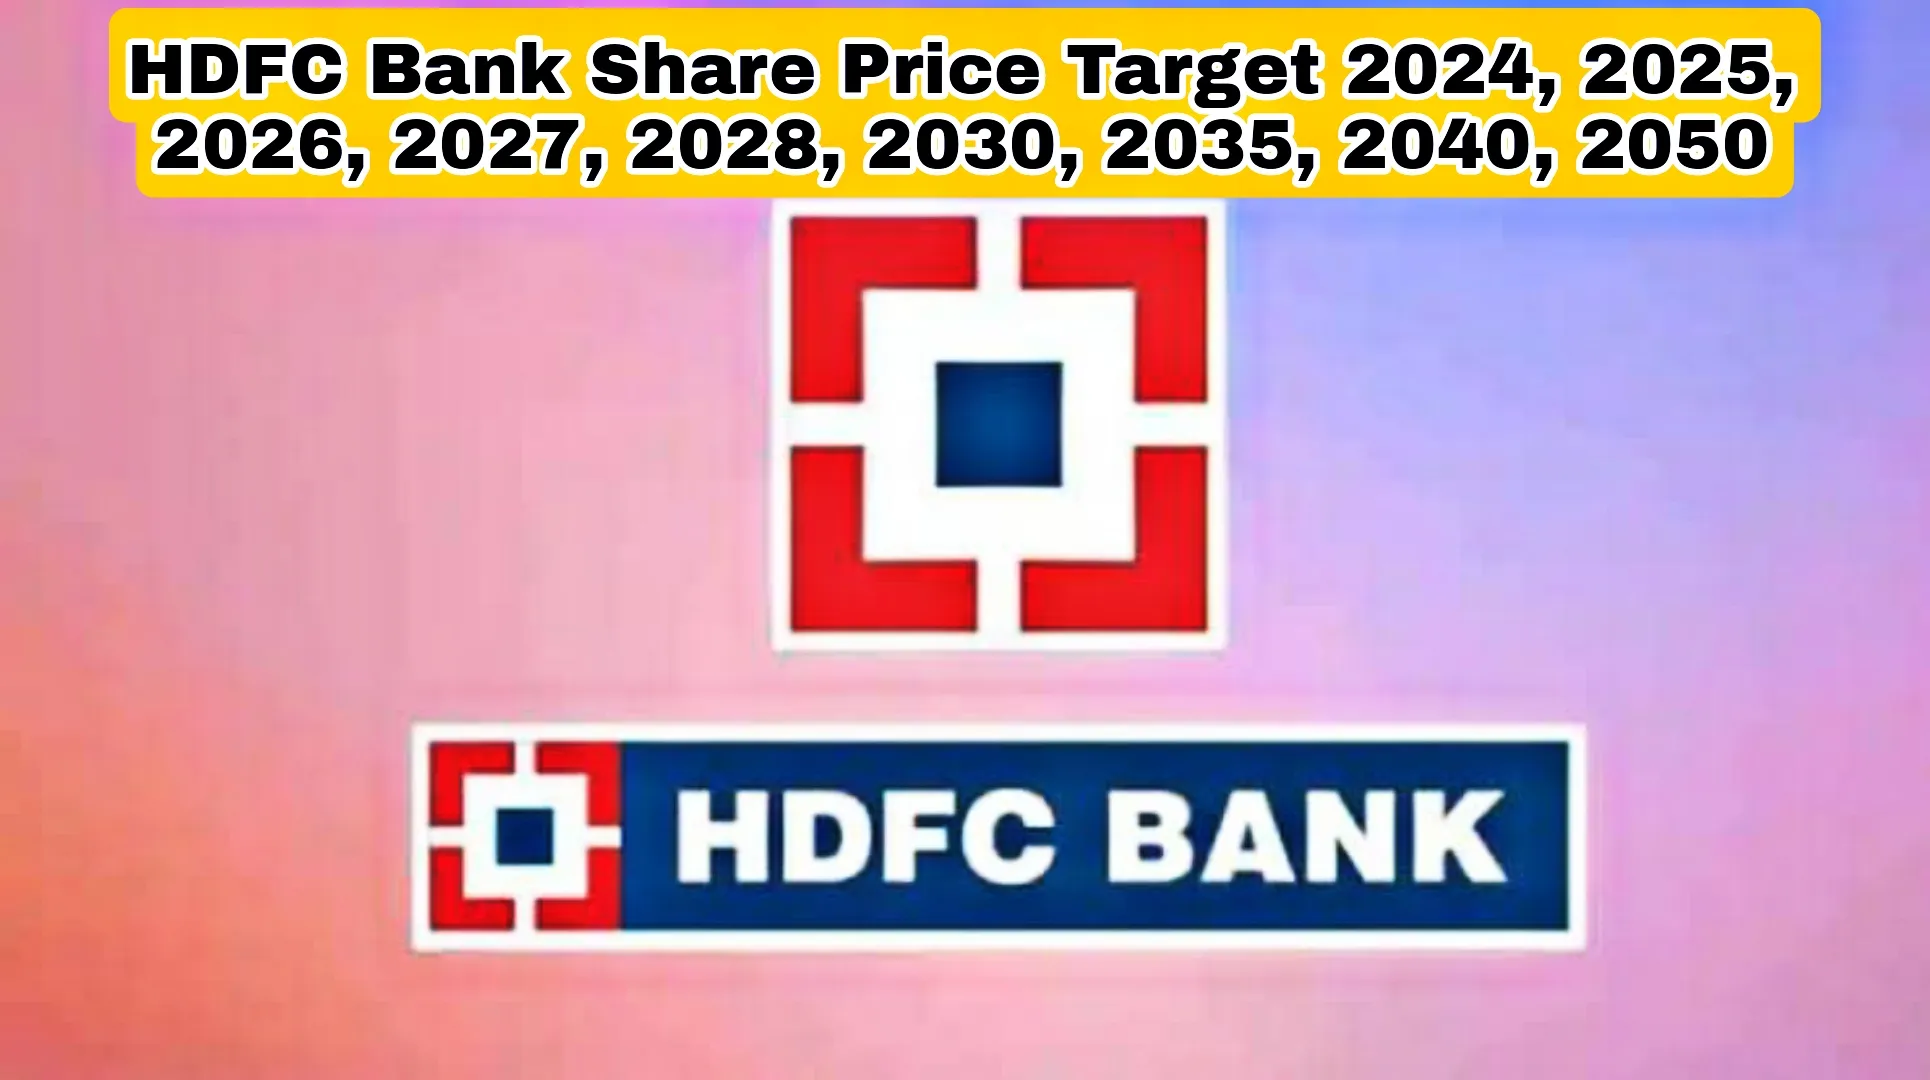 HDFC Bank Share Price Target 2024, 2025, 2026, 2027, 2028, 2030, 2035, 2040, 2050